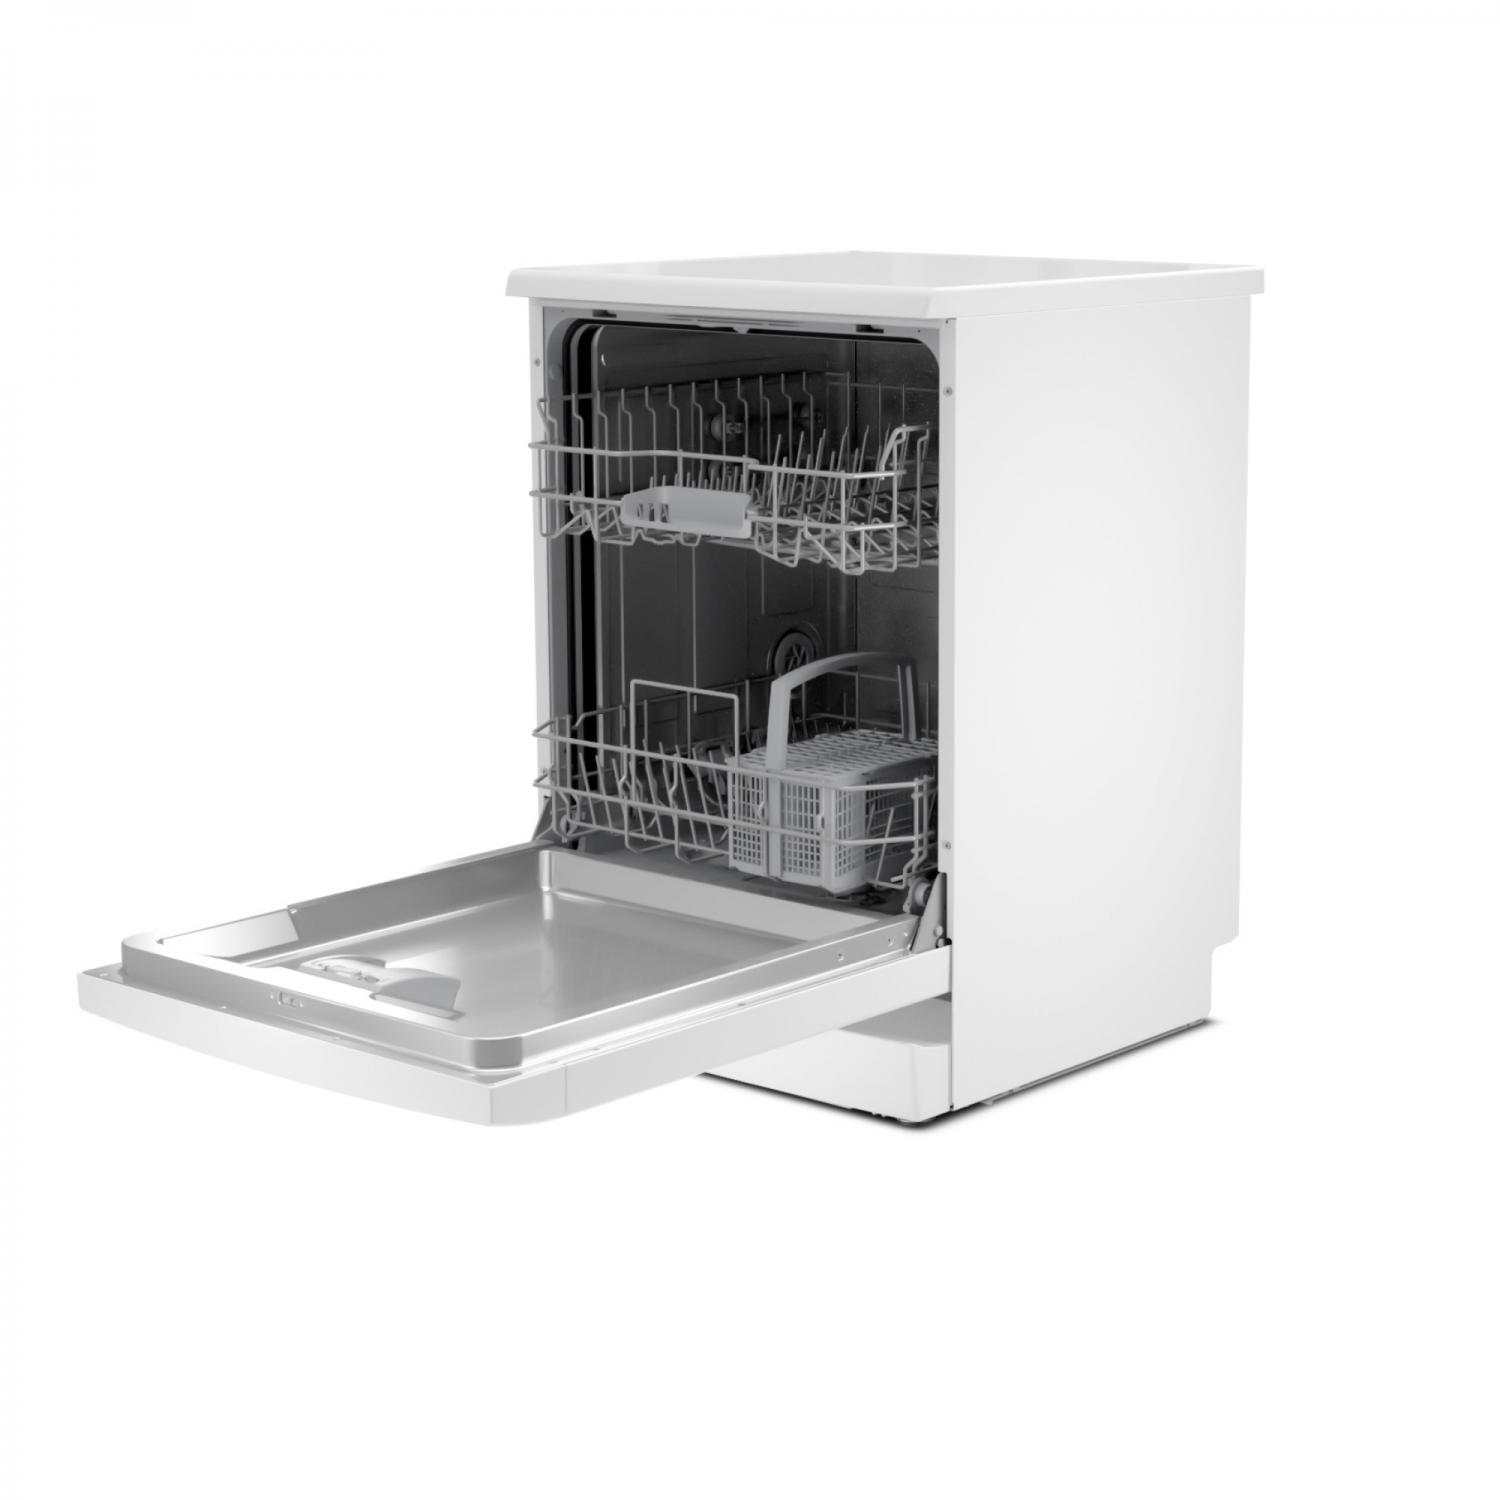 Bosch SGS2ITW08G Full Size Dishwasher - White - 12 Place Settings - 3